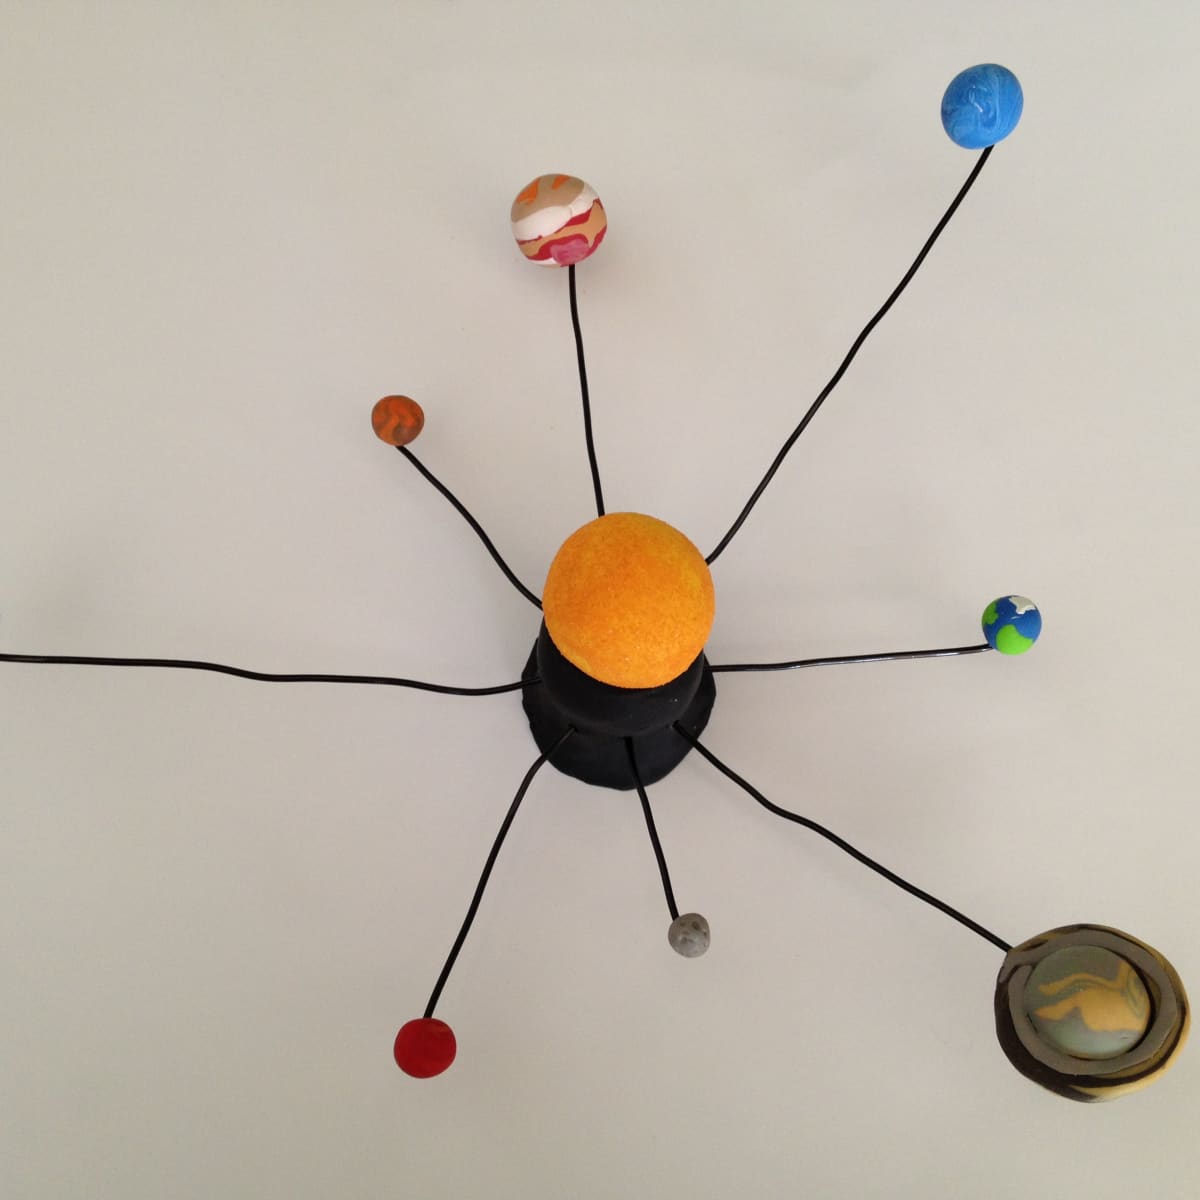 solar system craft projects